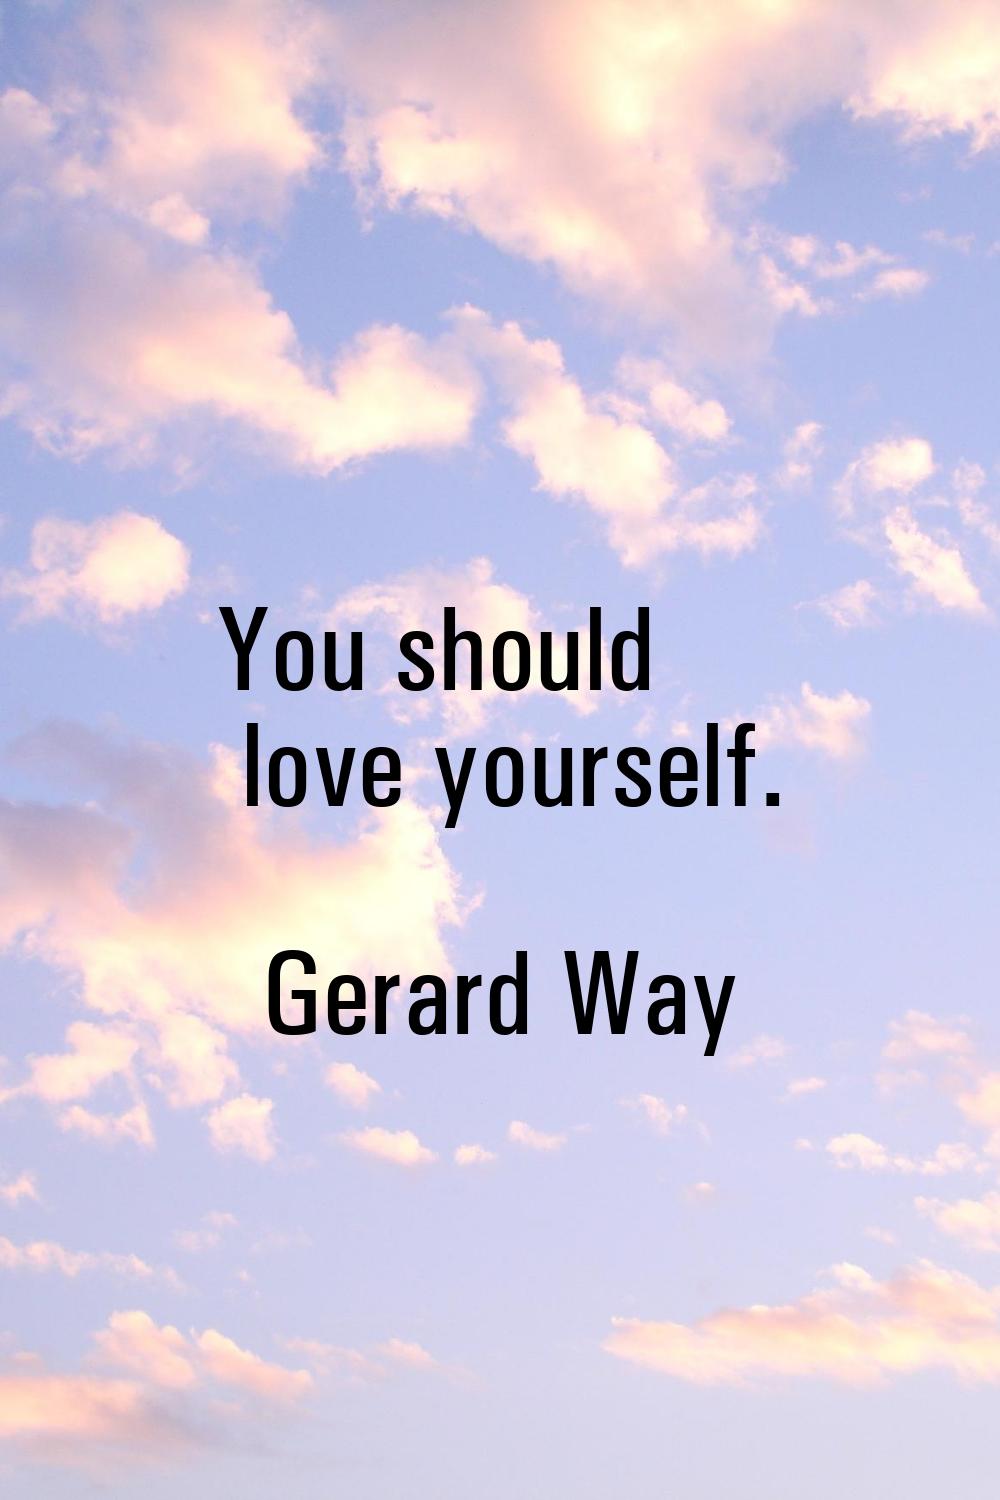 You should love yourself.